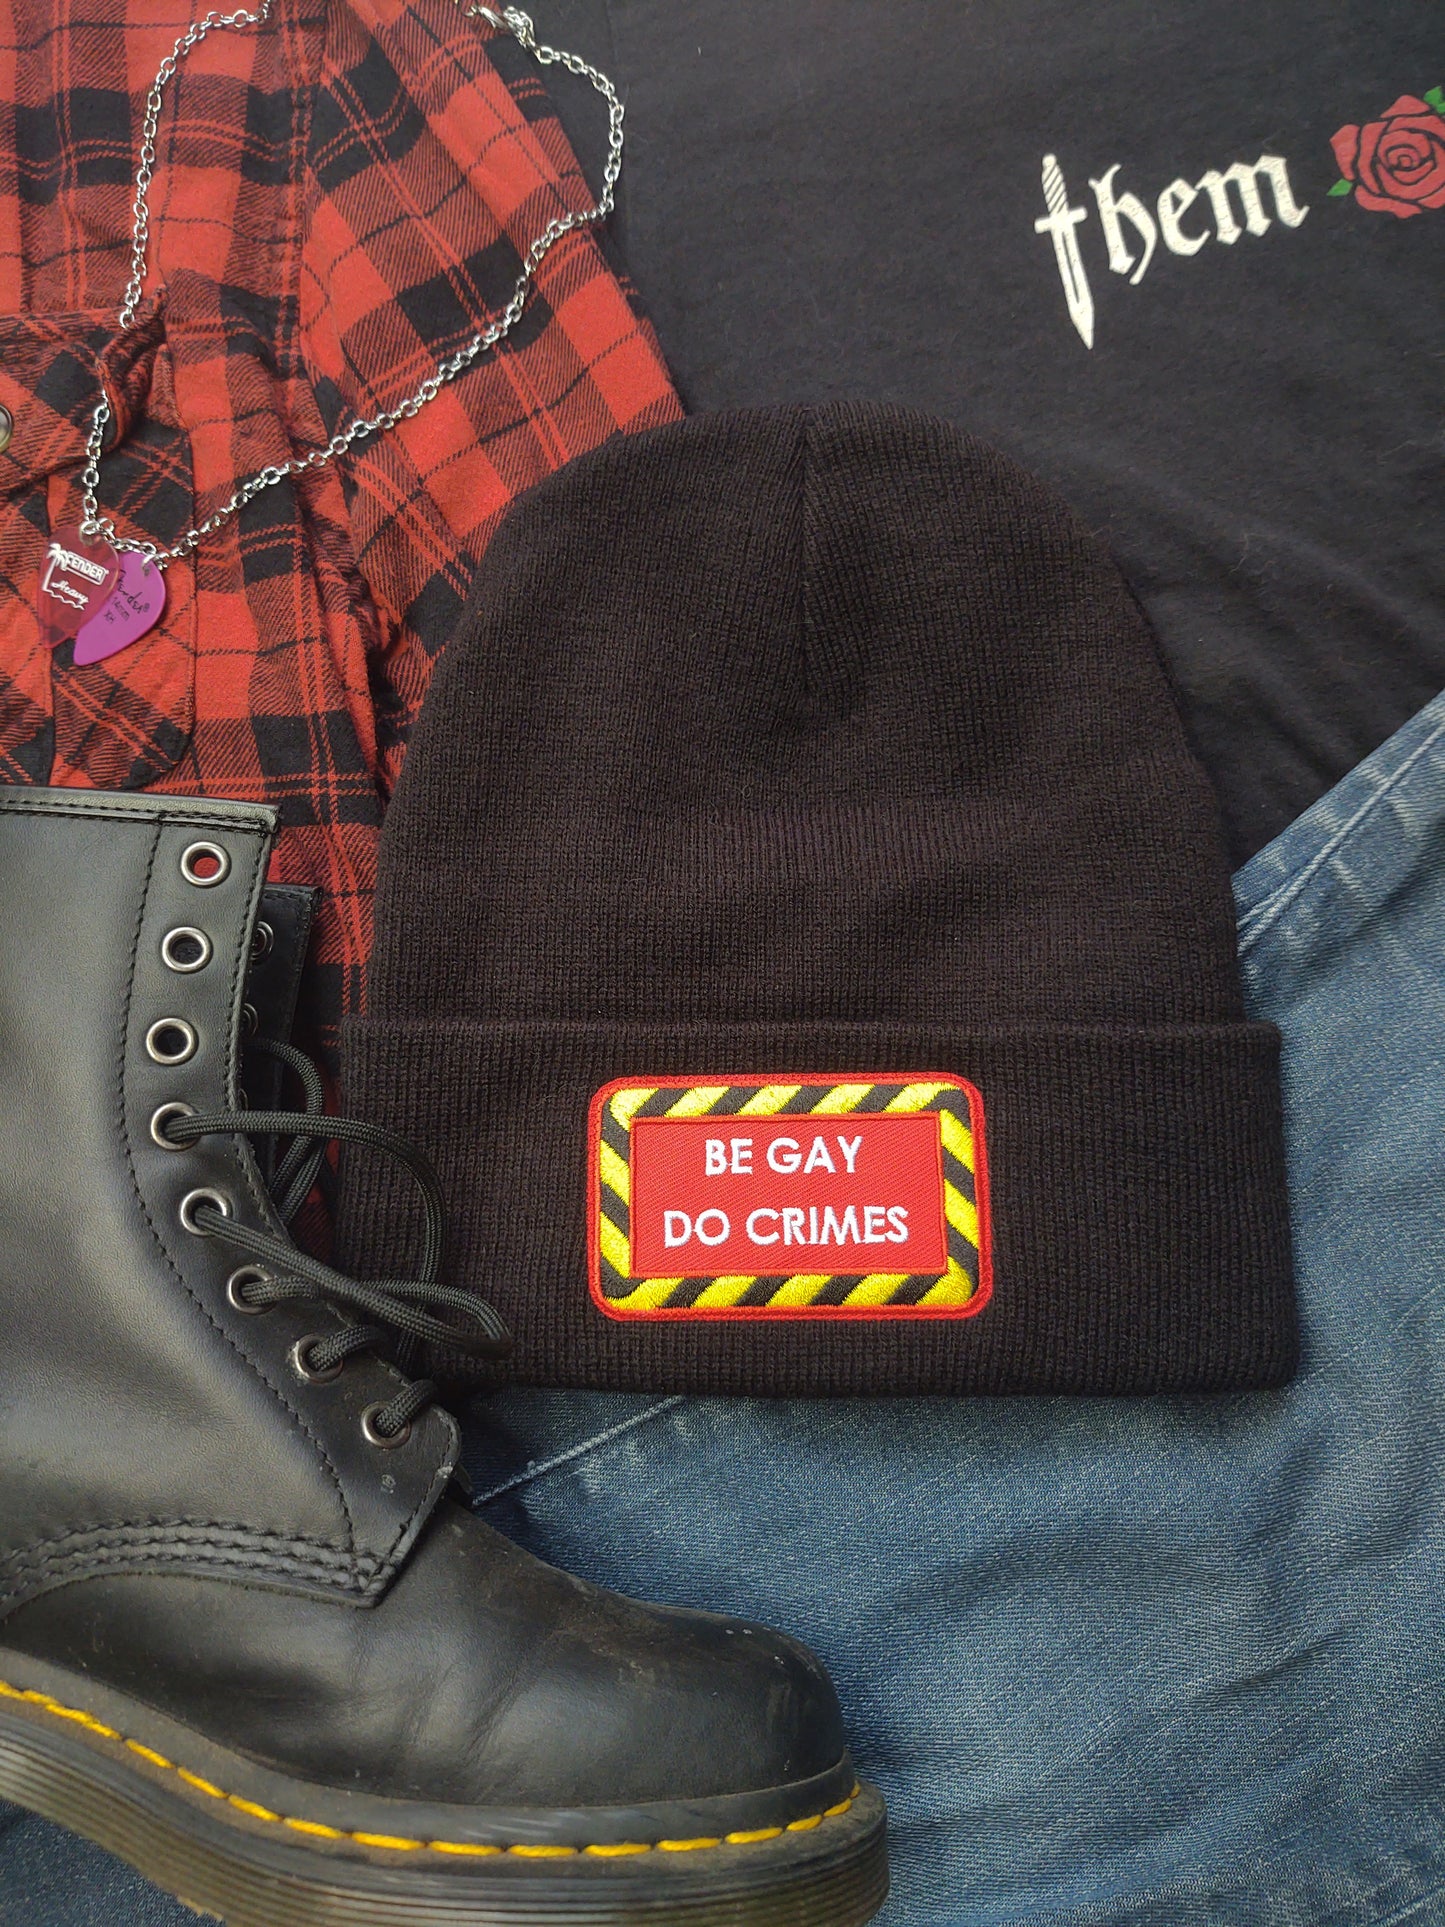 black beanie with red patch on the front with yellow and black striped border and white text reading "be gay do crimes". It is surrounded by the "them fatale" shirt, jeans, a red and black flannel, guitar pick necklace, and black doc martin boots.